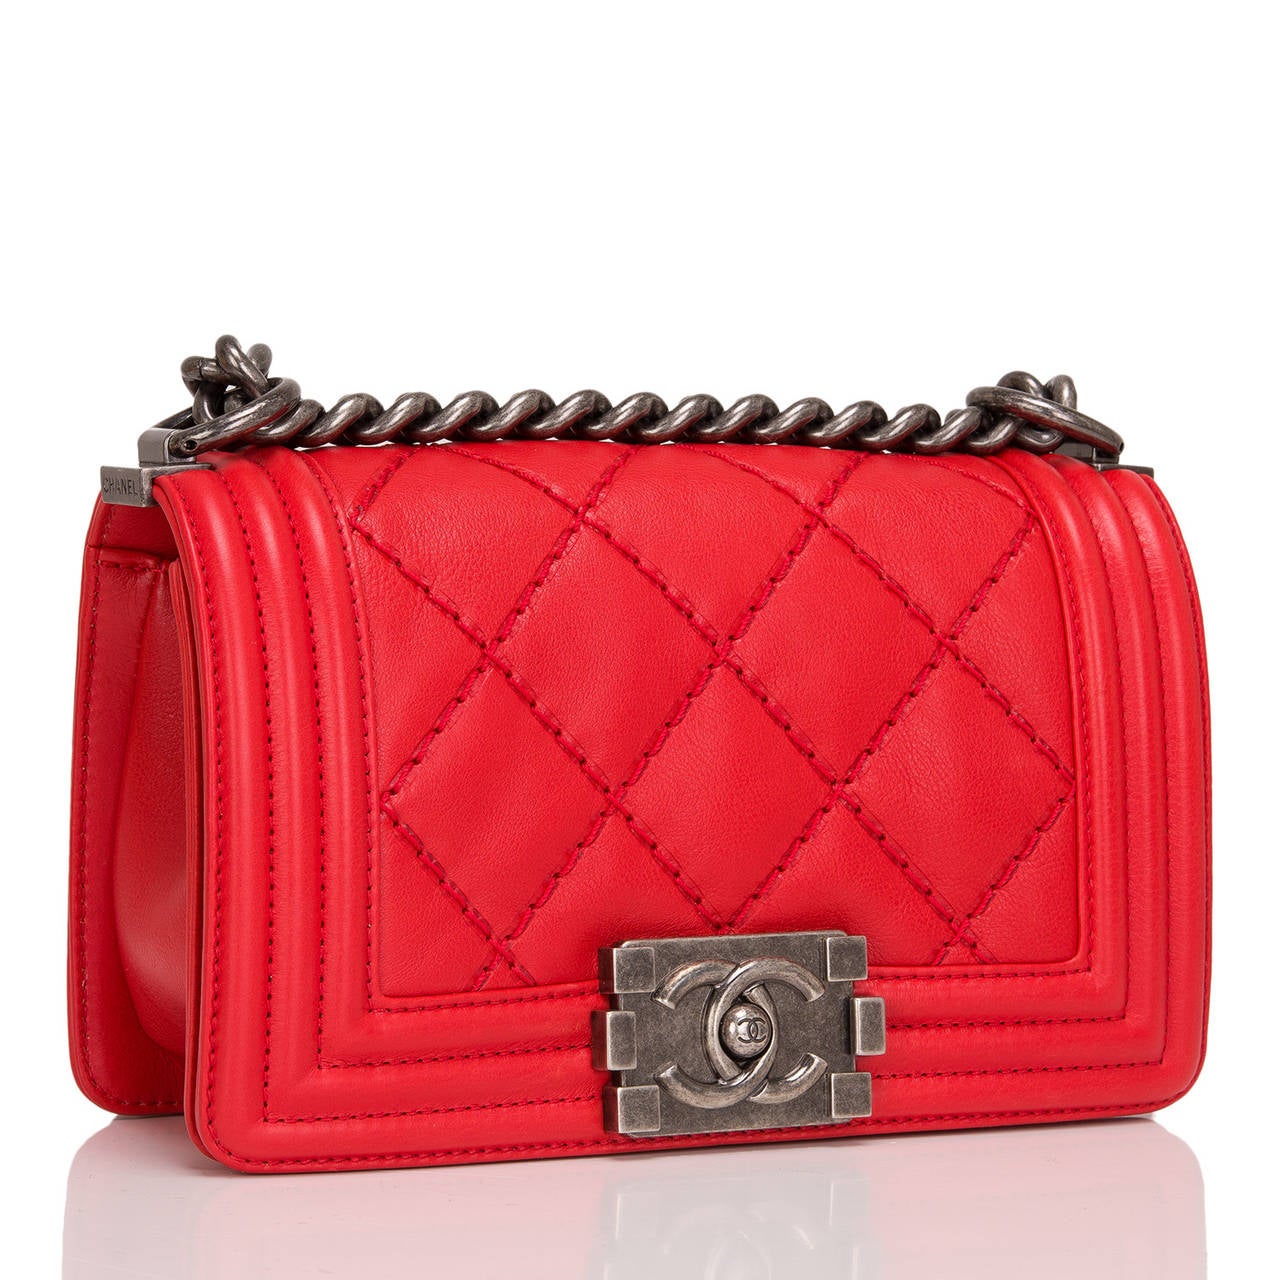 This Chanel Small Double Quilt Boy bag marries beautiful red quilted calfskin with ruthenium hardware. Like all the Boy styles, this bag features a front flap with the Boy Chanel signature CC push lock closure and ruthenium chain link and red